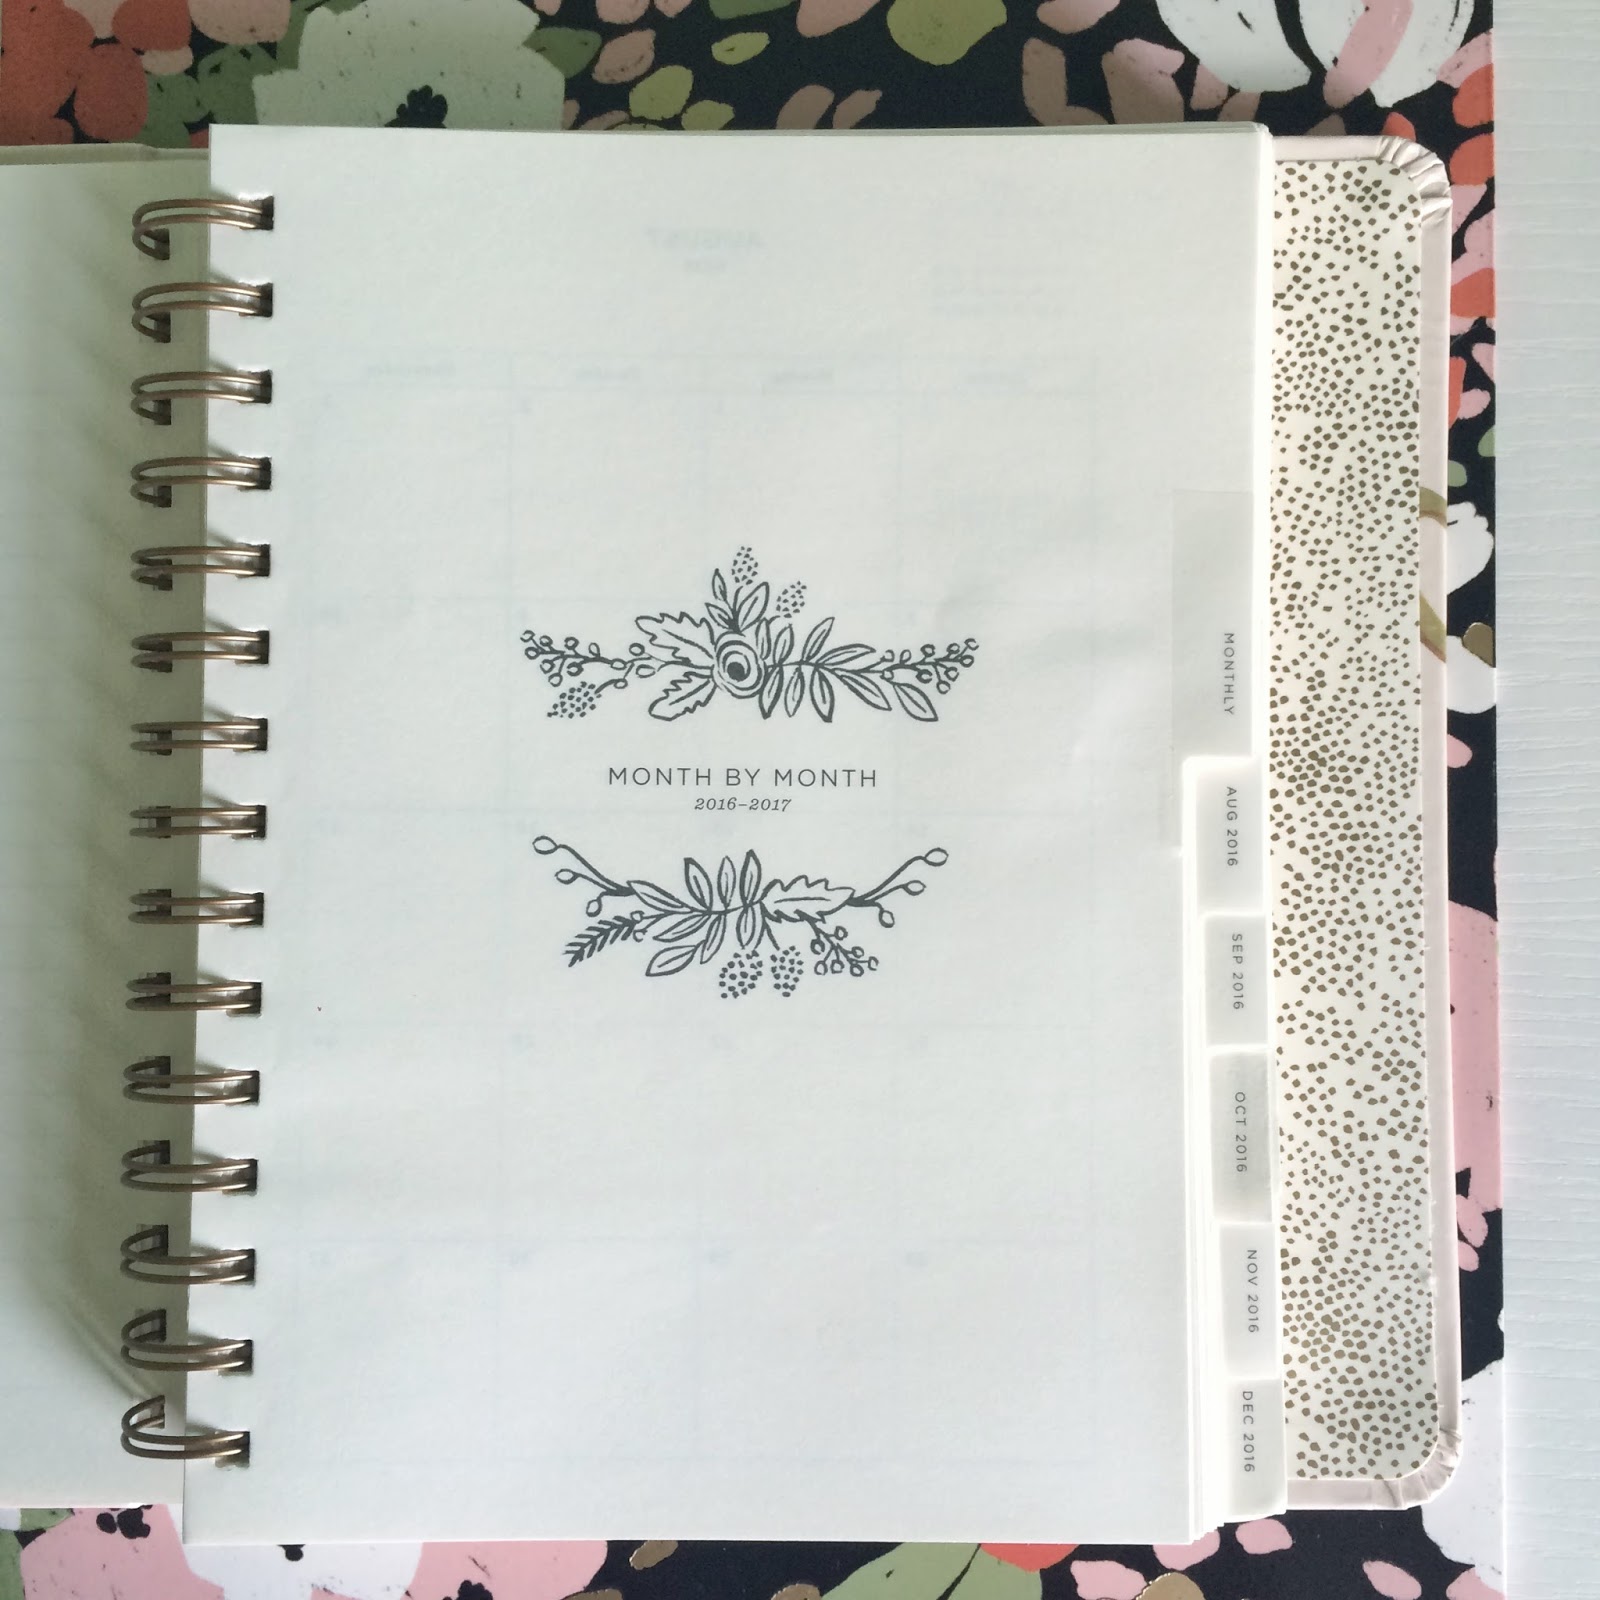 File to Style: 2017 RIFLE PAPER CO. PLANNER REVIEW